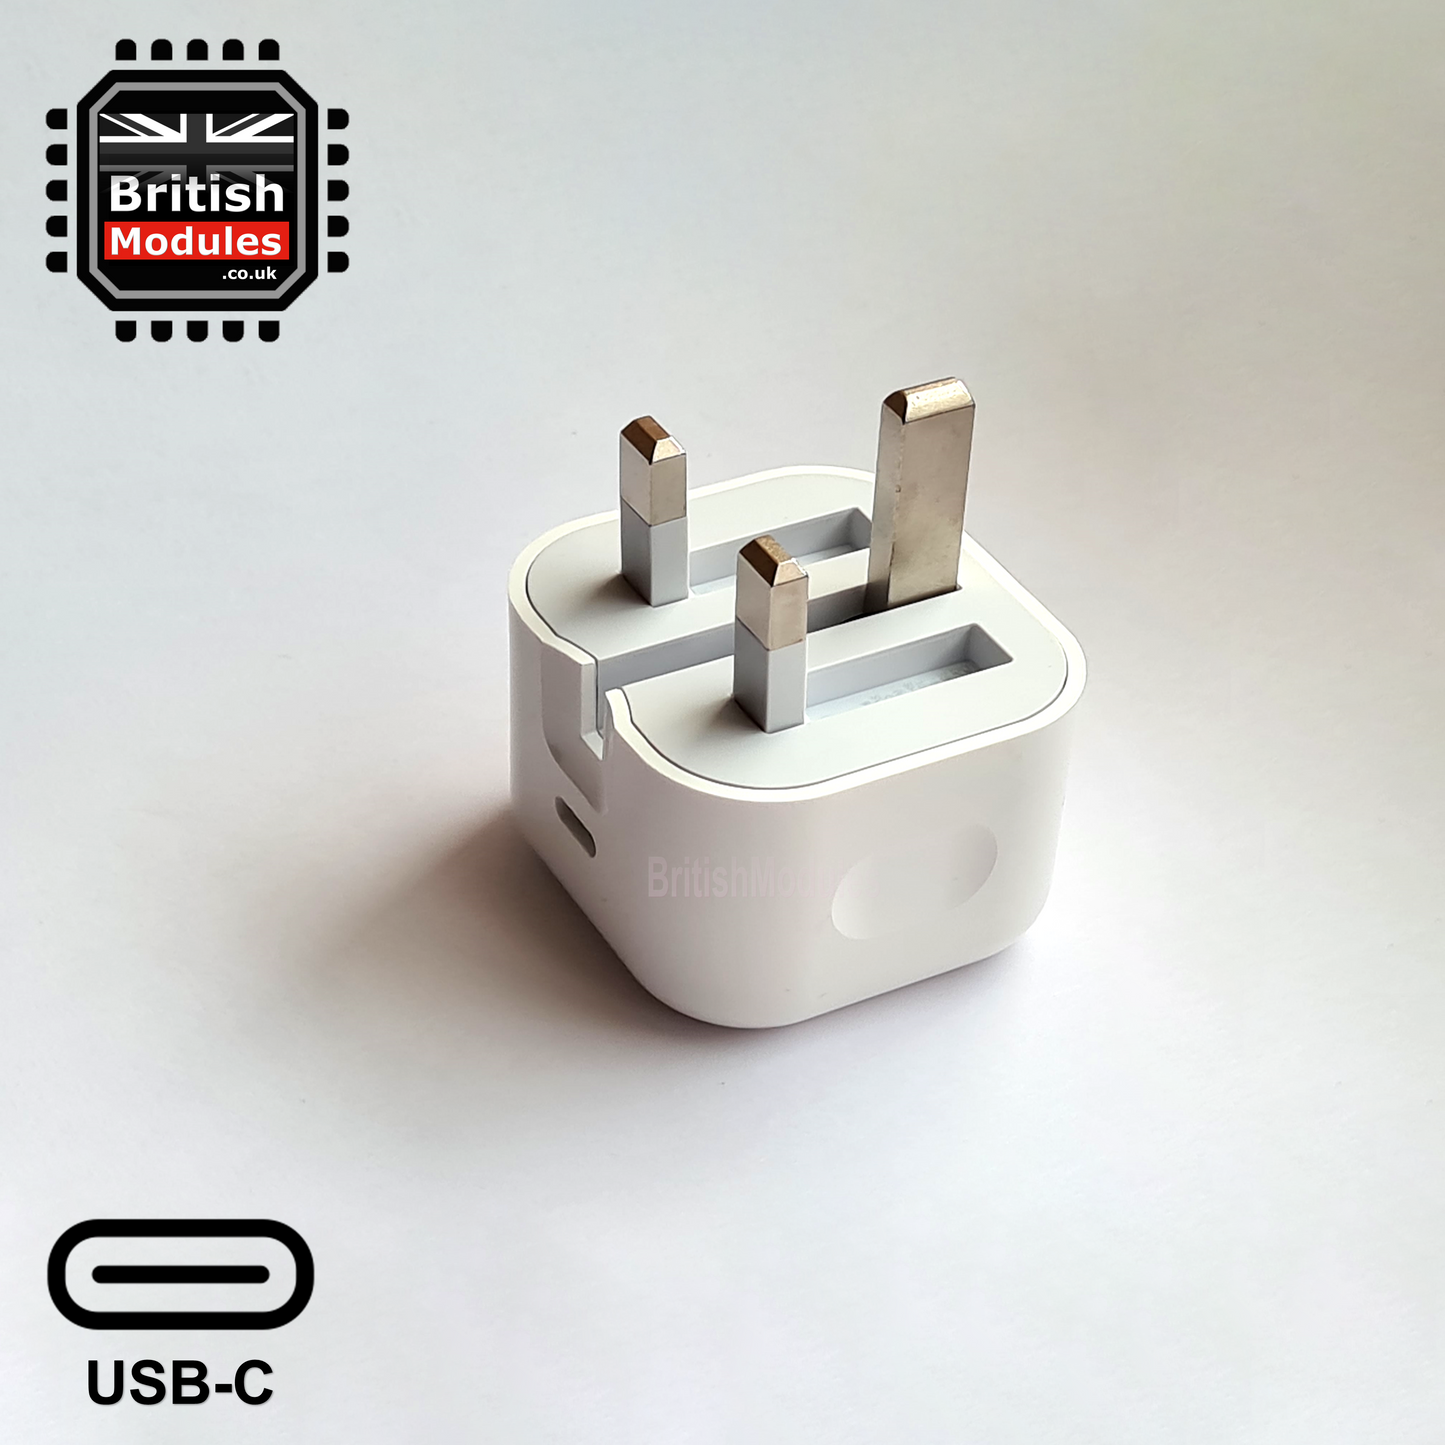 18W USB-C Power Adapter Plug for iPad / iPhone Charger Head Wall UK